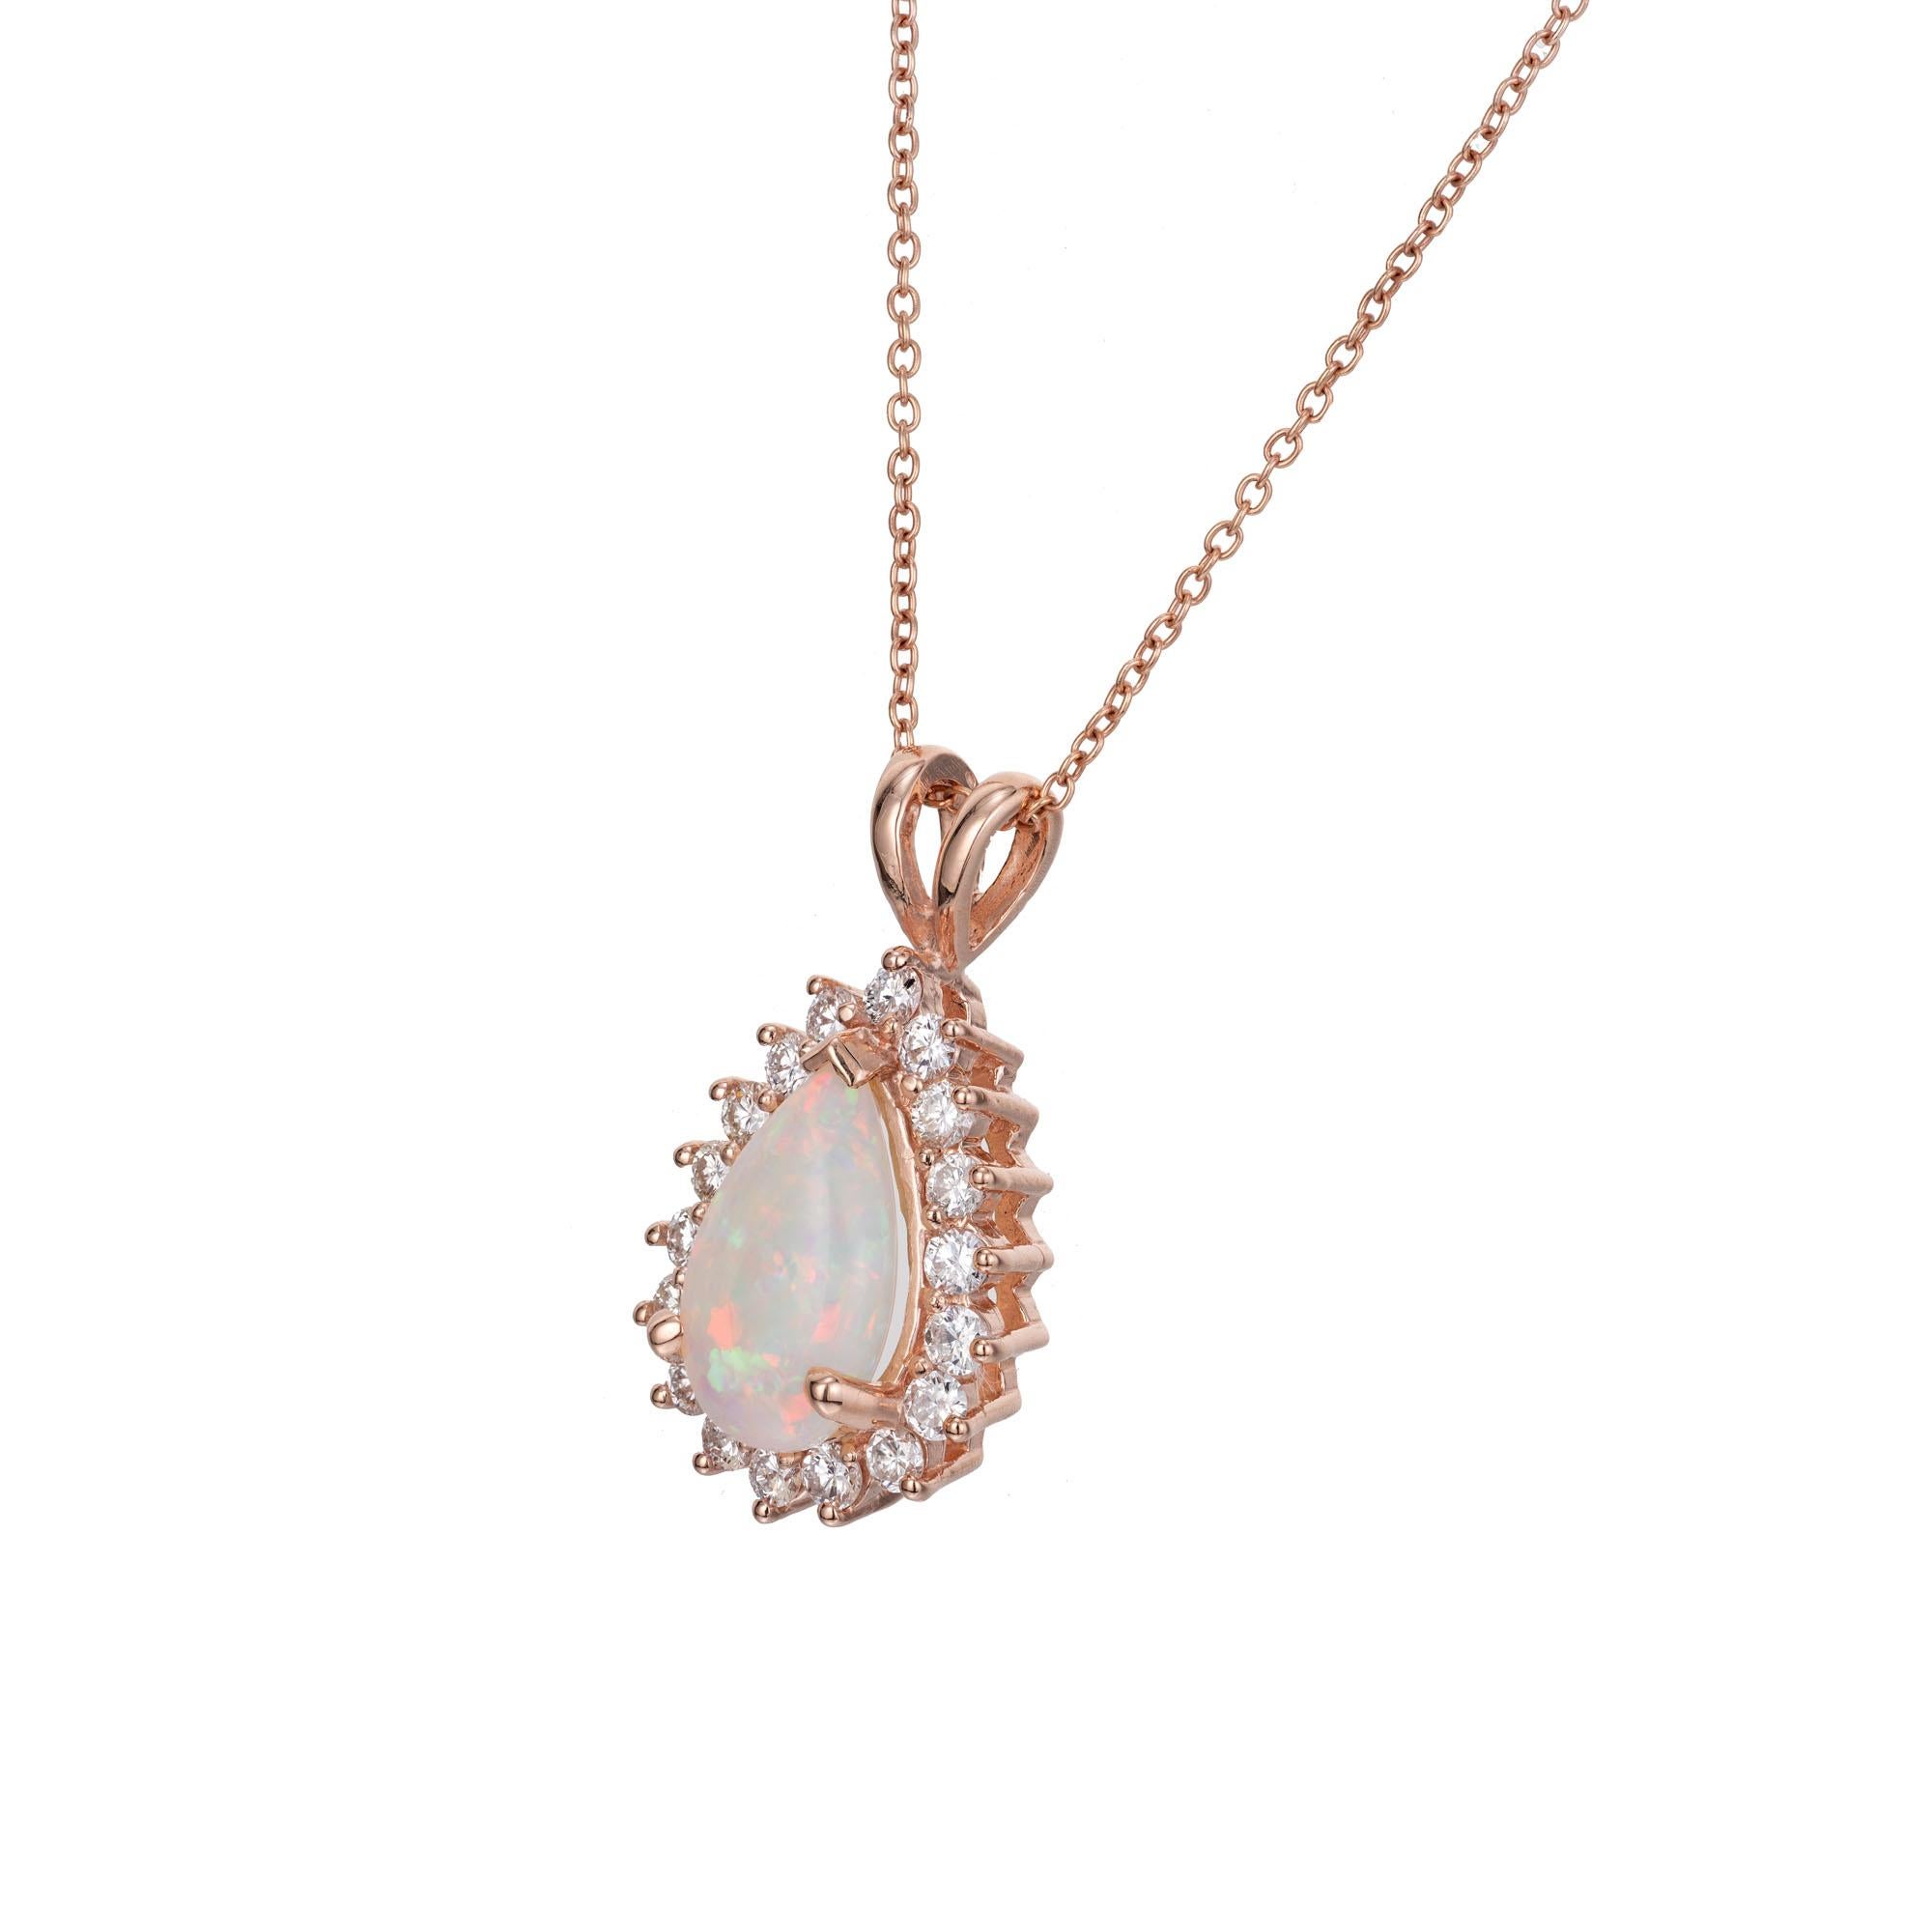 Green, red and blue opal and diamond pendant, necklace. 1 pear shaped cabochon opal with a halo of 18 round brilliant cut diamonds set in a 14k rose gold setting. 18 inch 14k rose gold chain. 

1 pear shaped cabochon opal, approx. total weight: